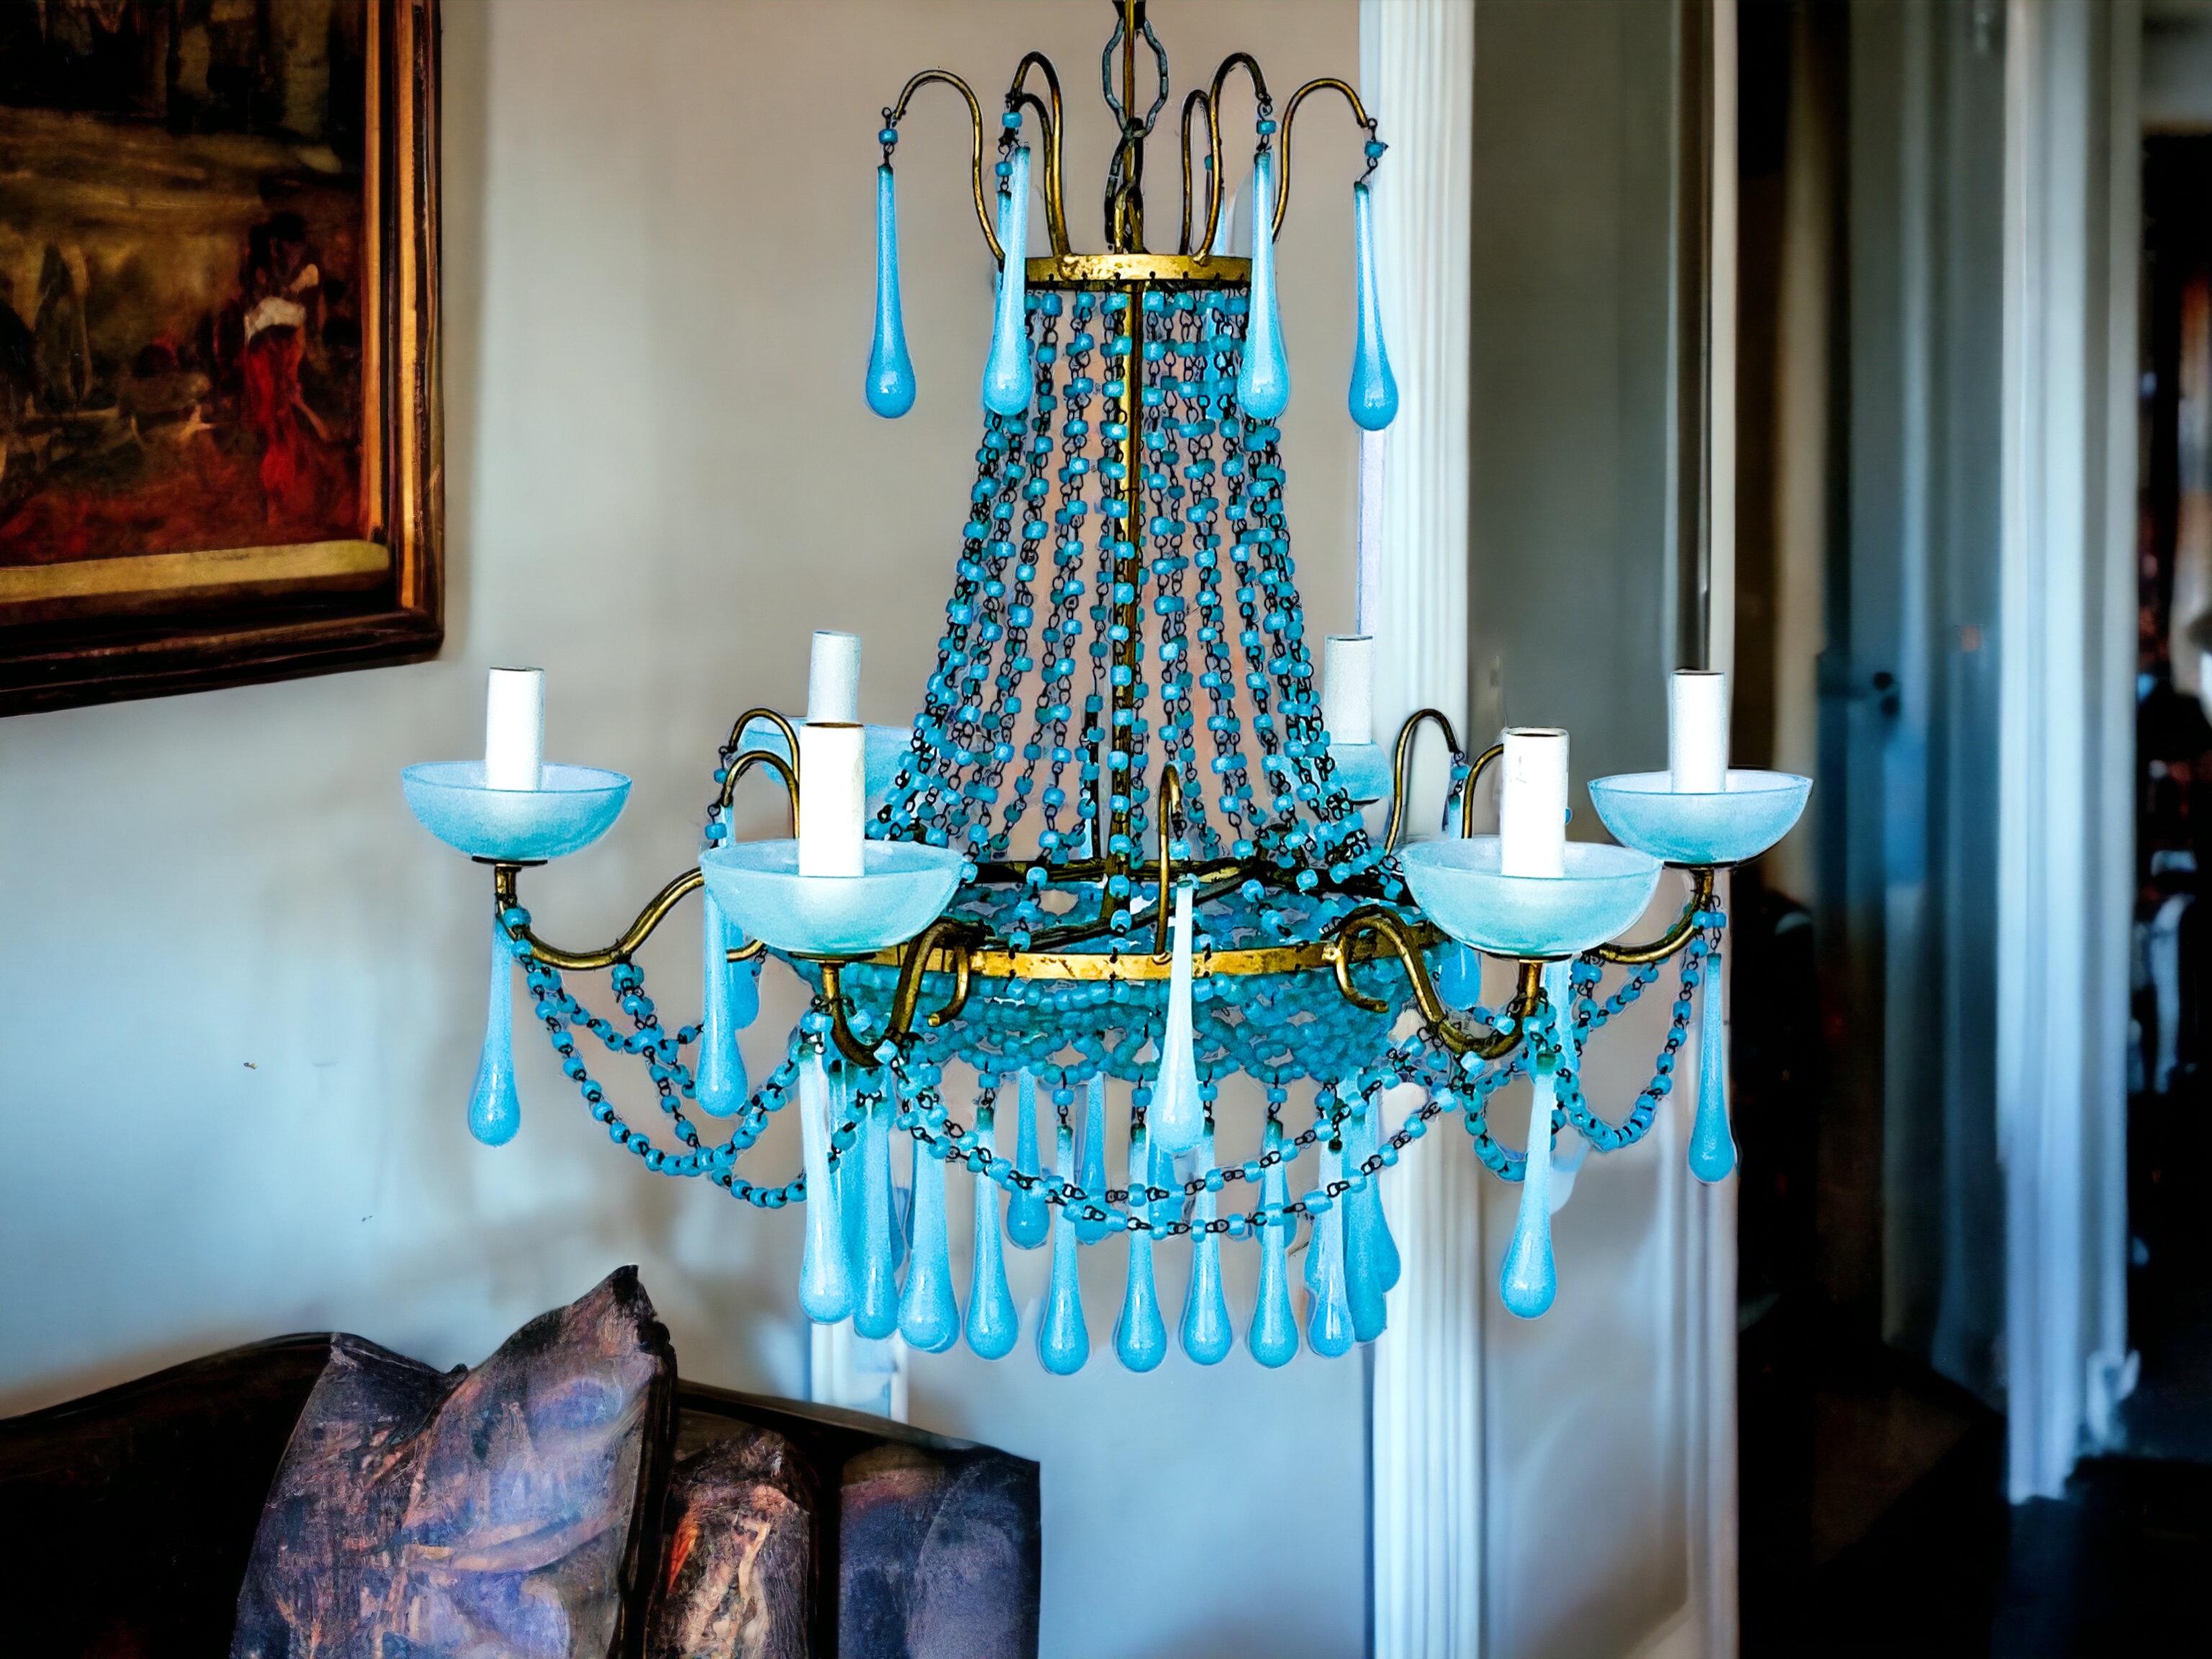 Late 20th Century Italian Turquoise Crystal & Gilt Metal Chandelier - 6 Arm  For Sale 3